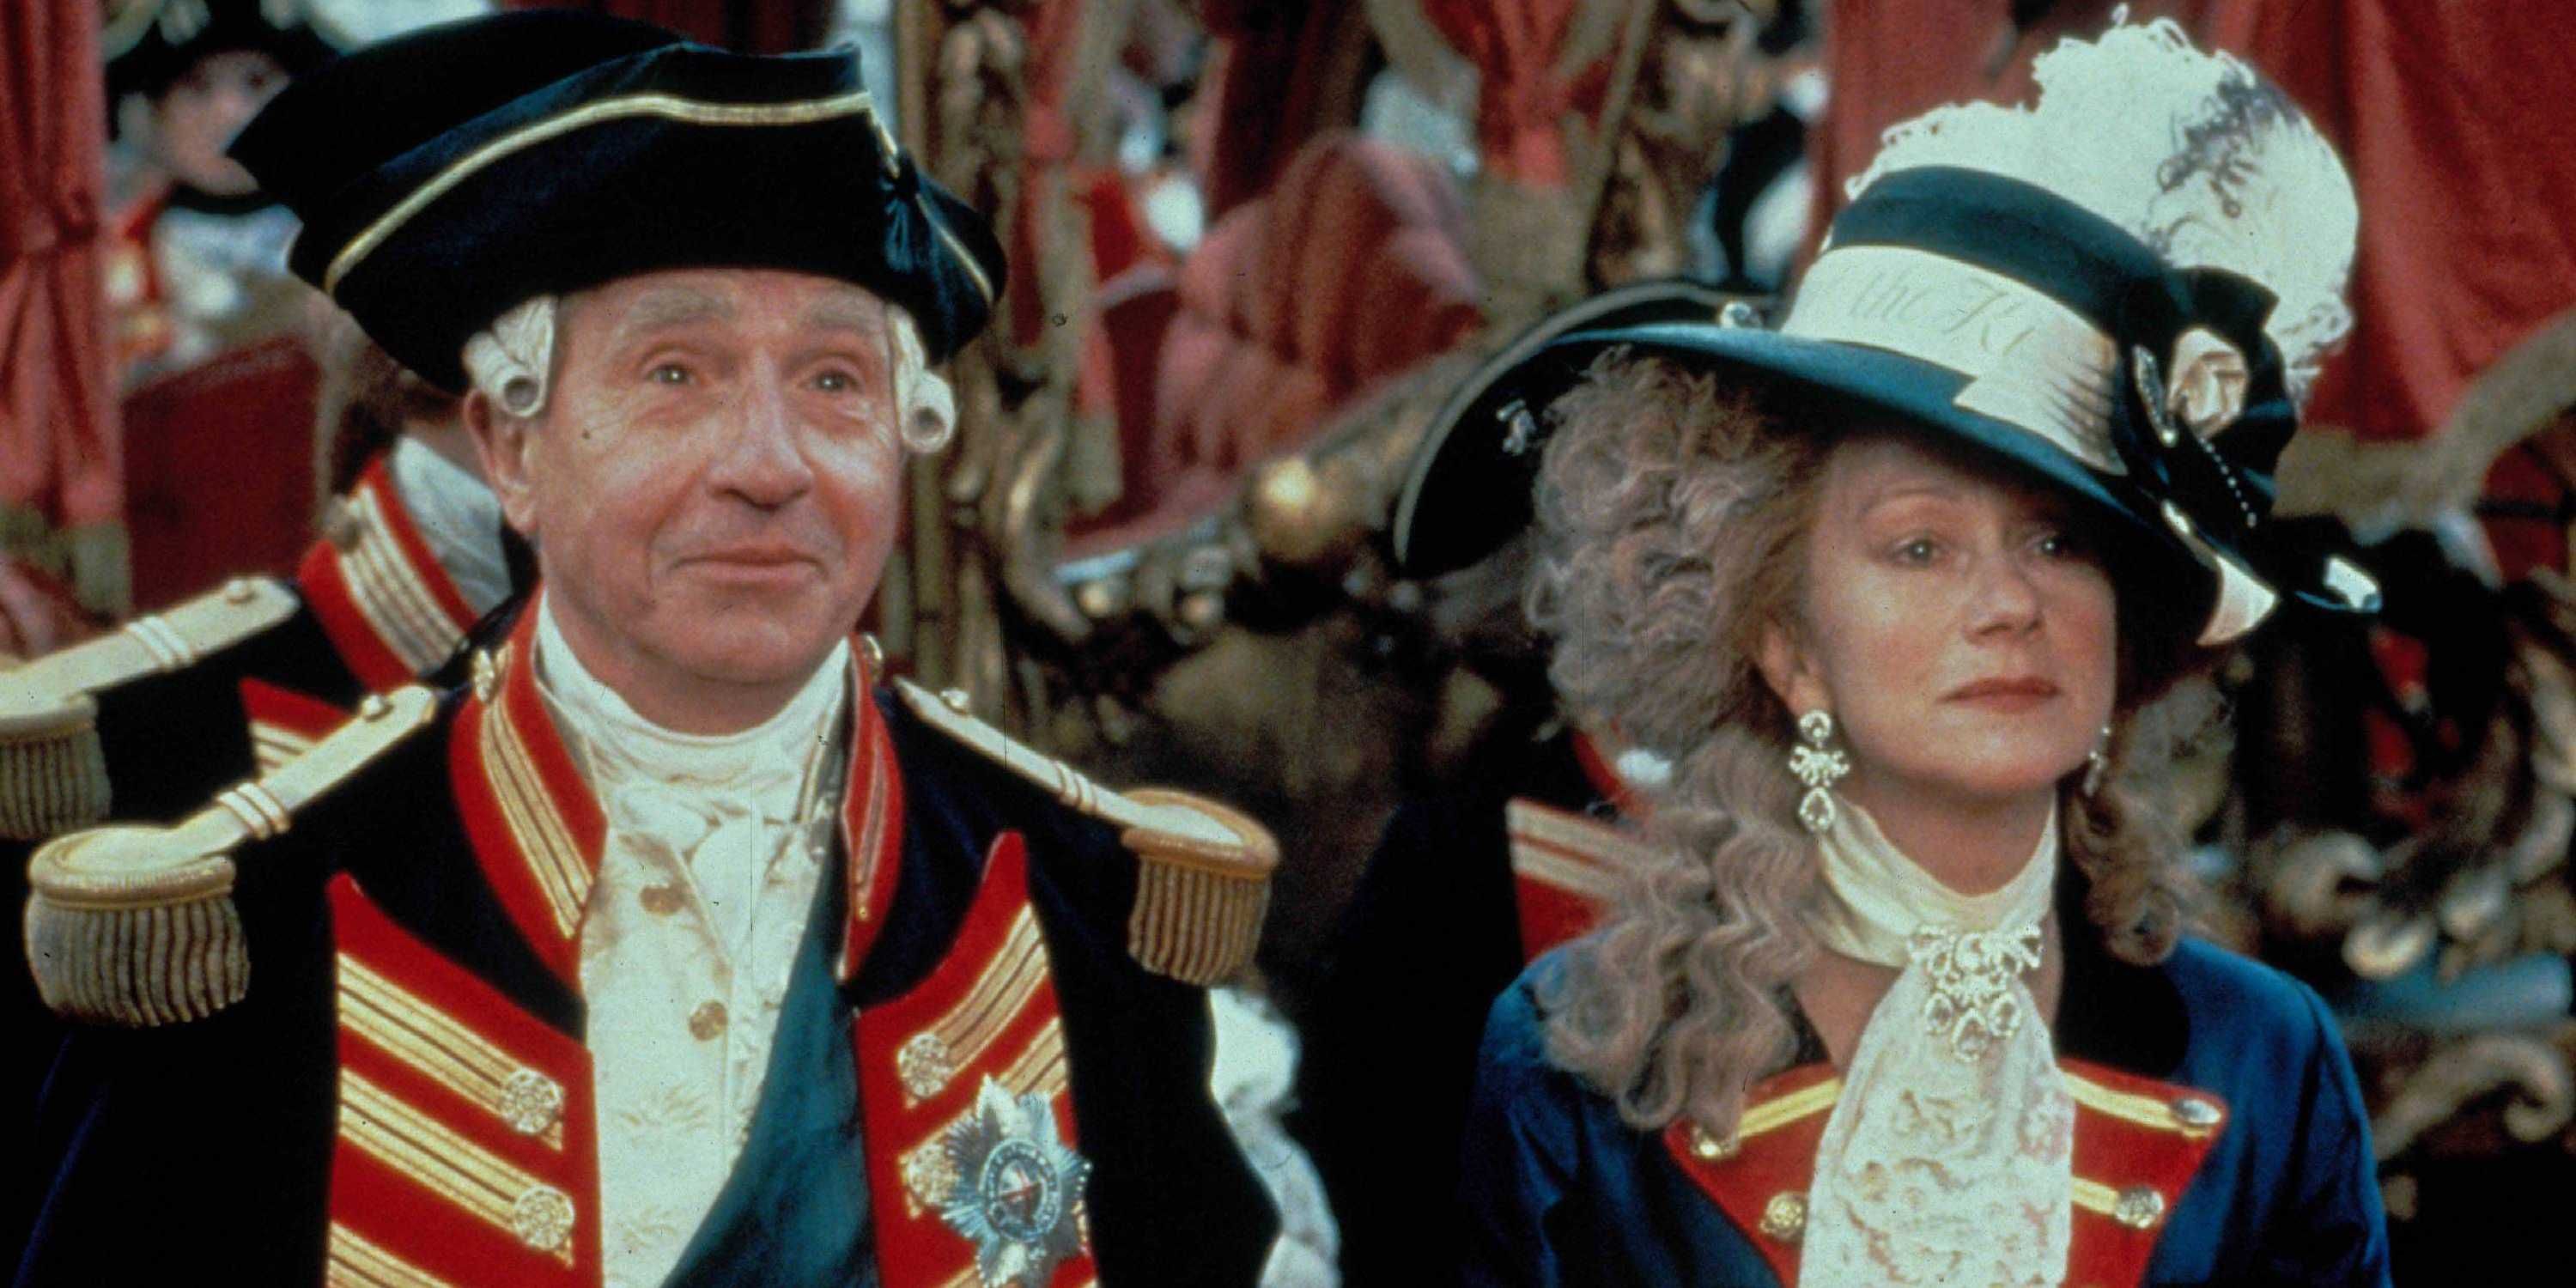 Nigel Hawthorne as King George III Helen Mirren as Queen Charlotte during a royal ceremony in The Madness of King George